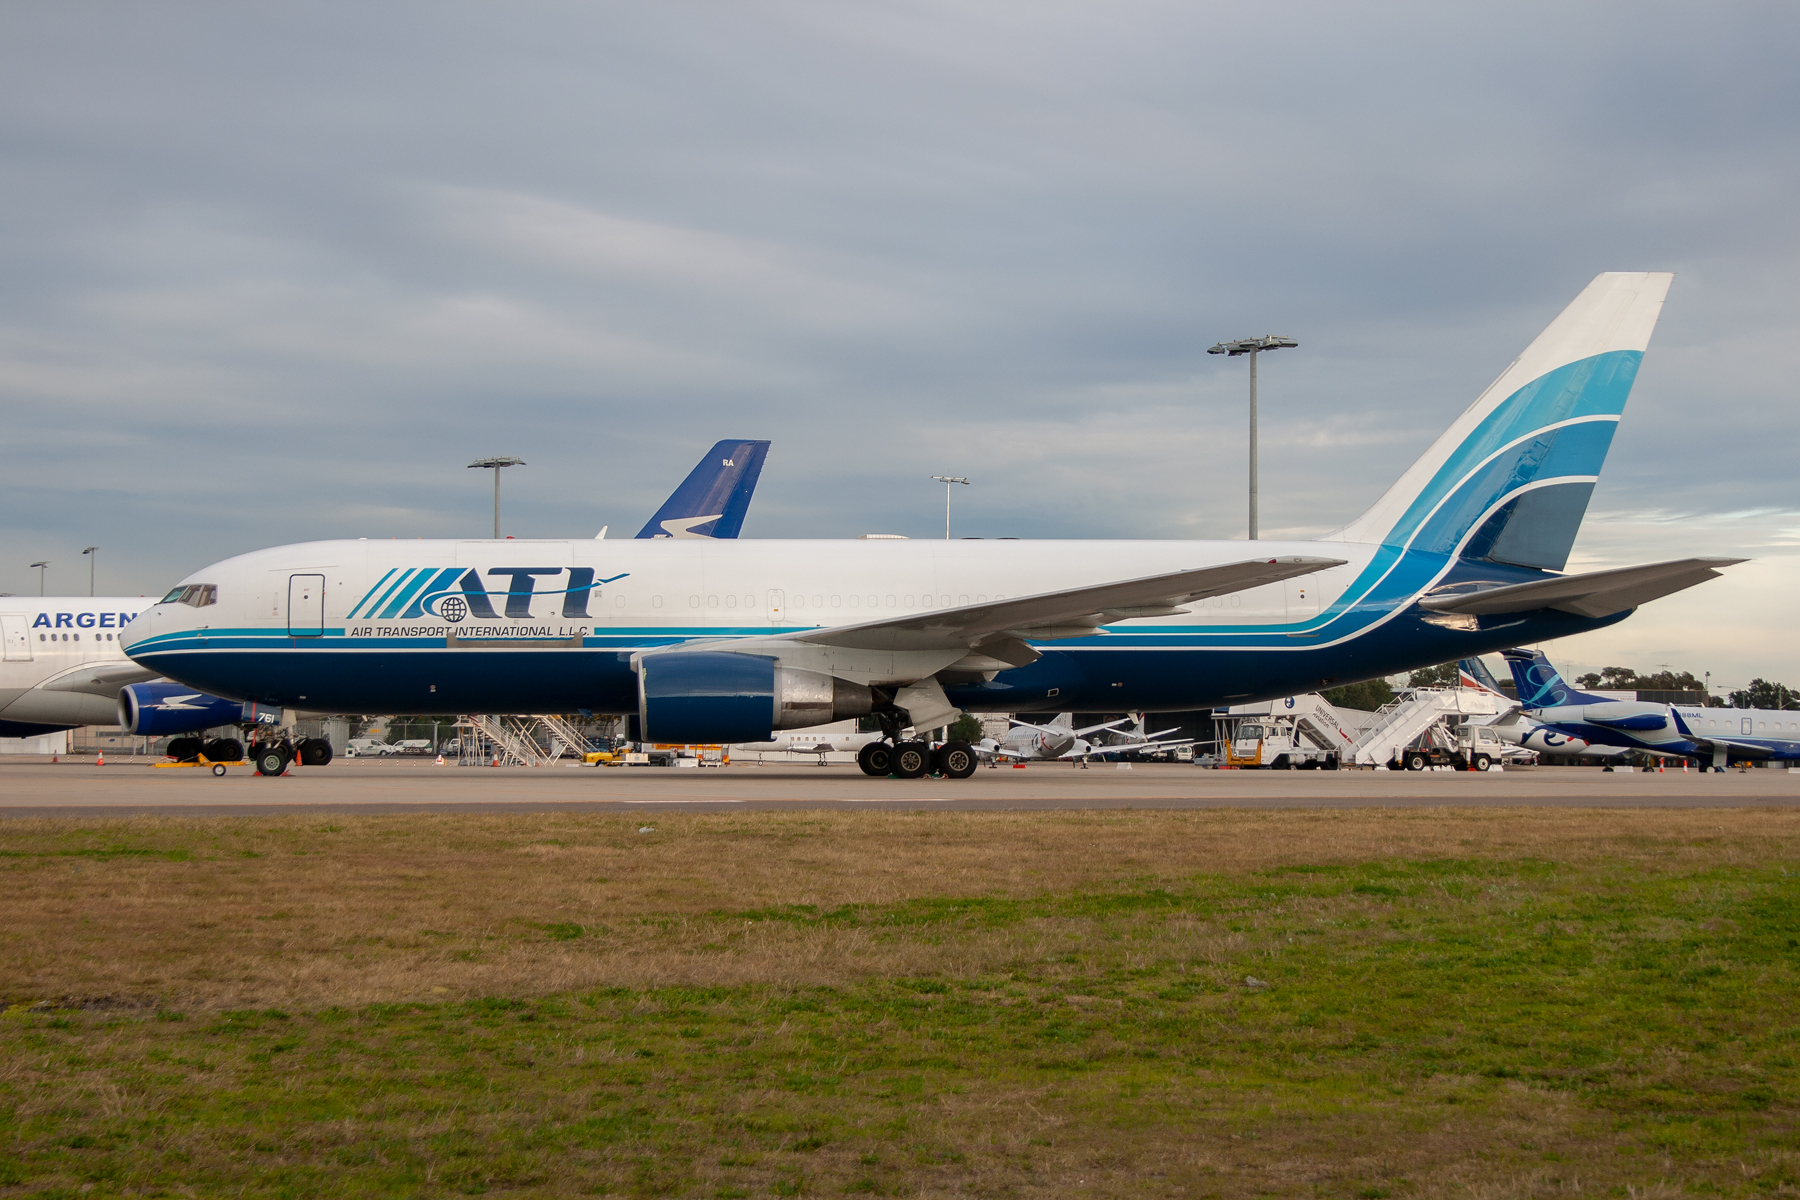 Air Transport Int'l Boeing 767-200F N761CX at Kingsford Smith